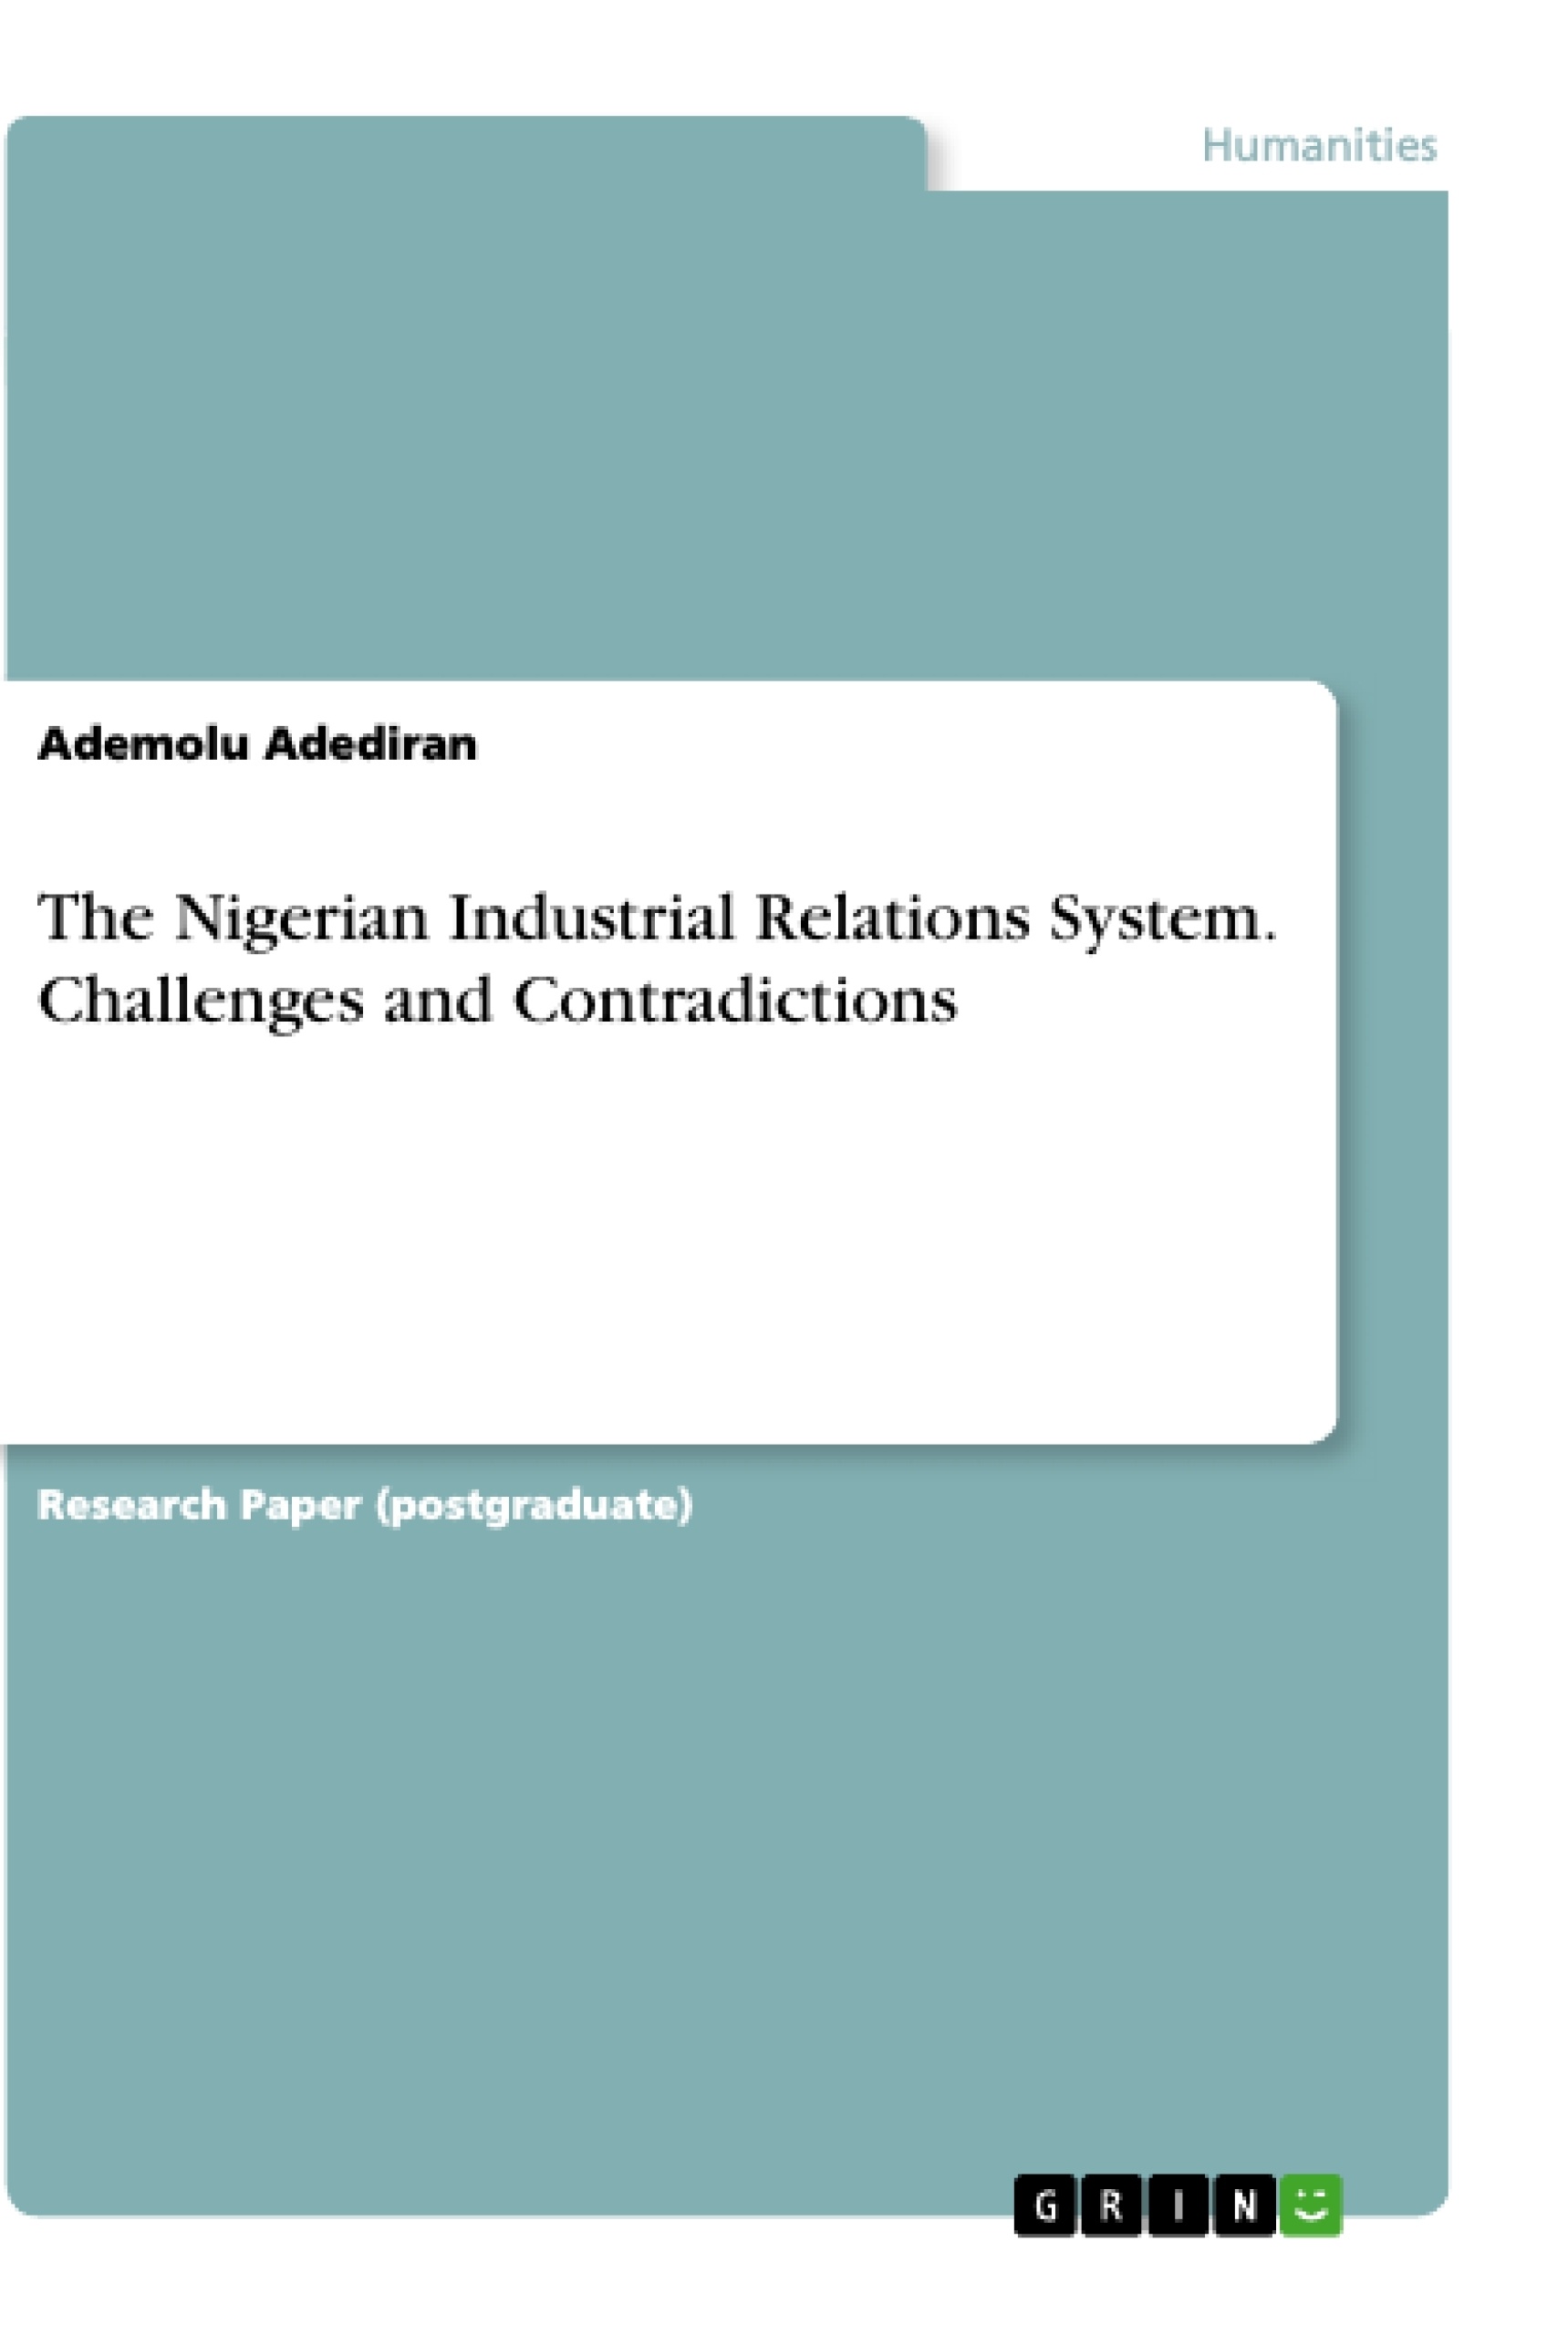 Title: The Nigerian Industrial Relations System. Challenges and Contradictions